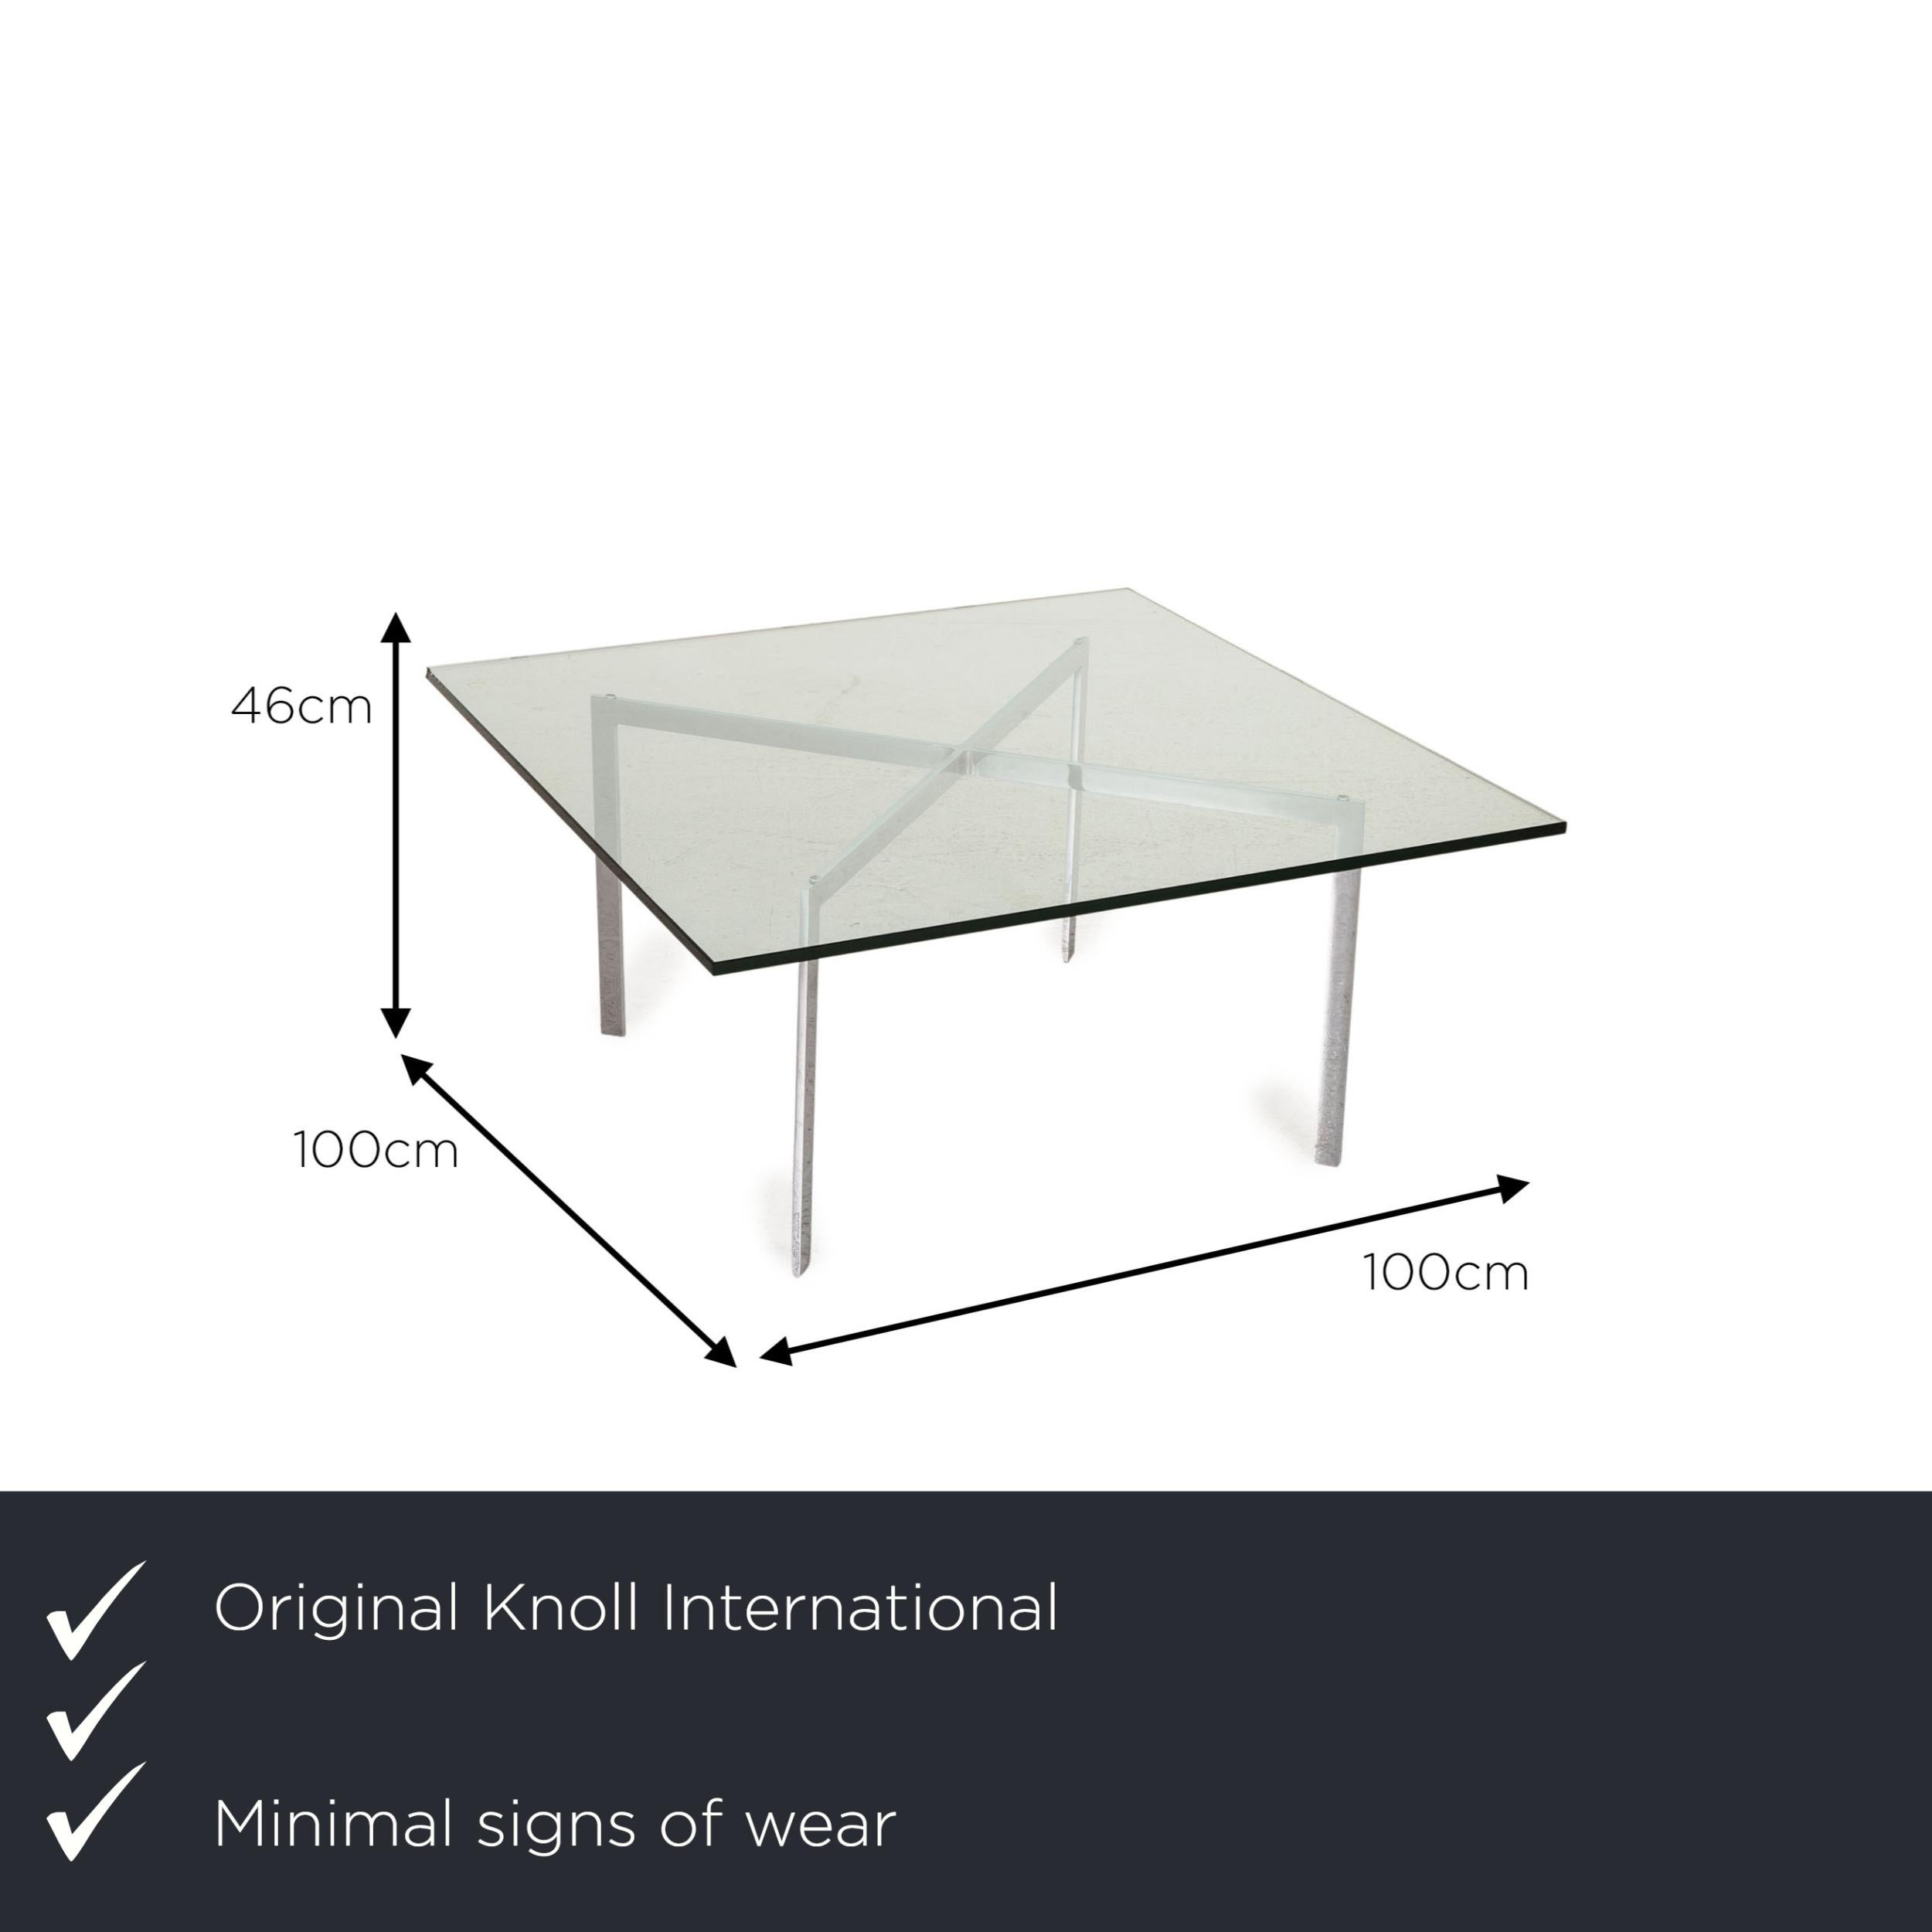 We present to you a Knoll International Barcelona glass coffee table table.

Product measurements in centimeters:

depth: 100
width: 100
height: 46.






 